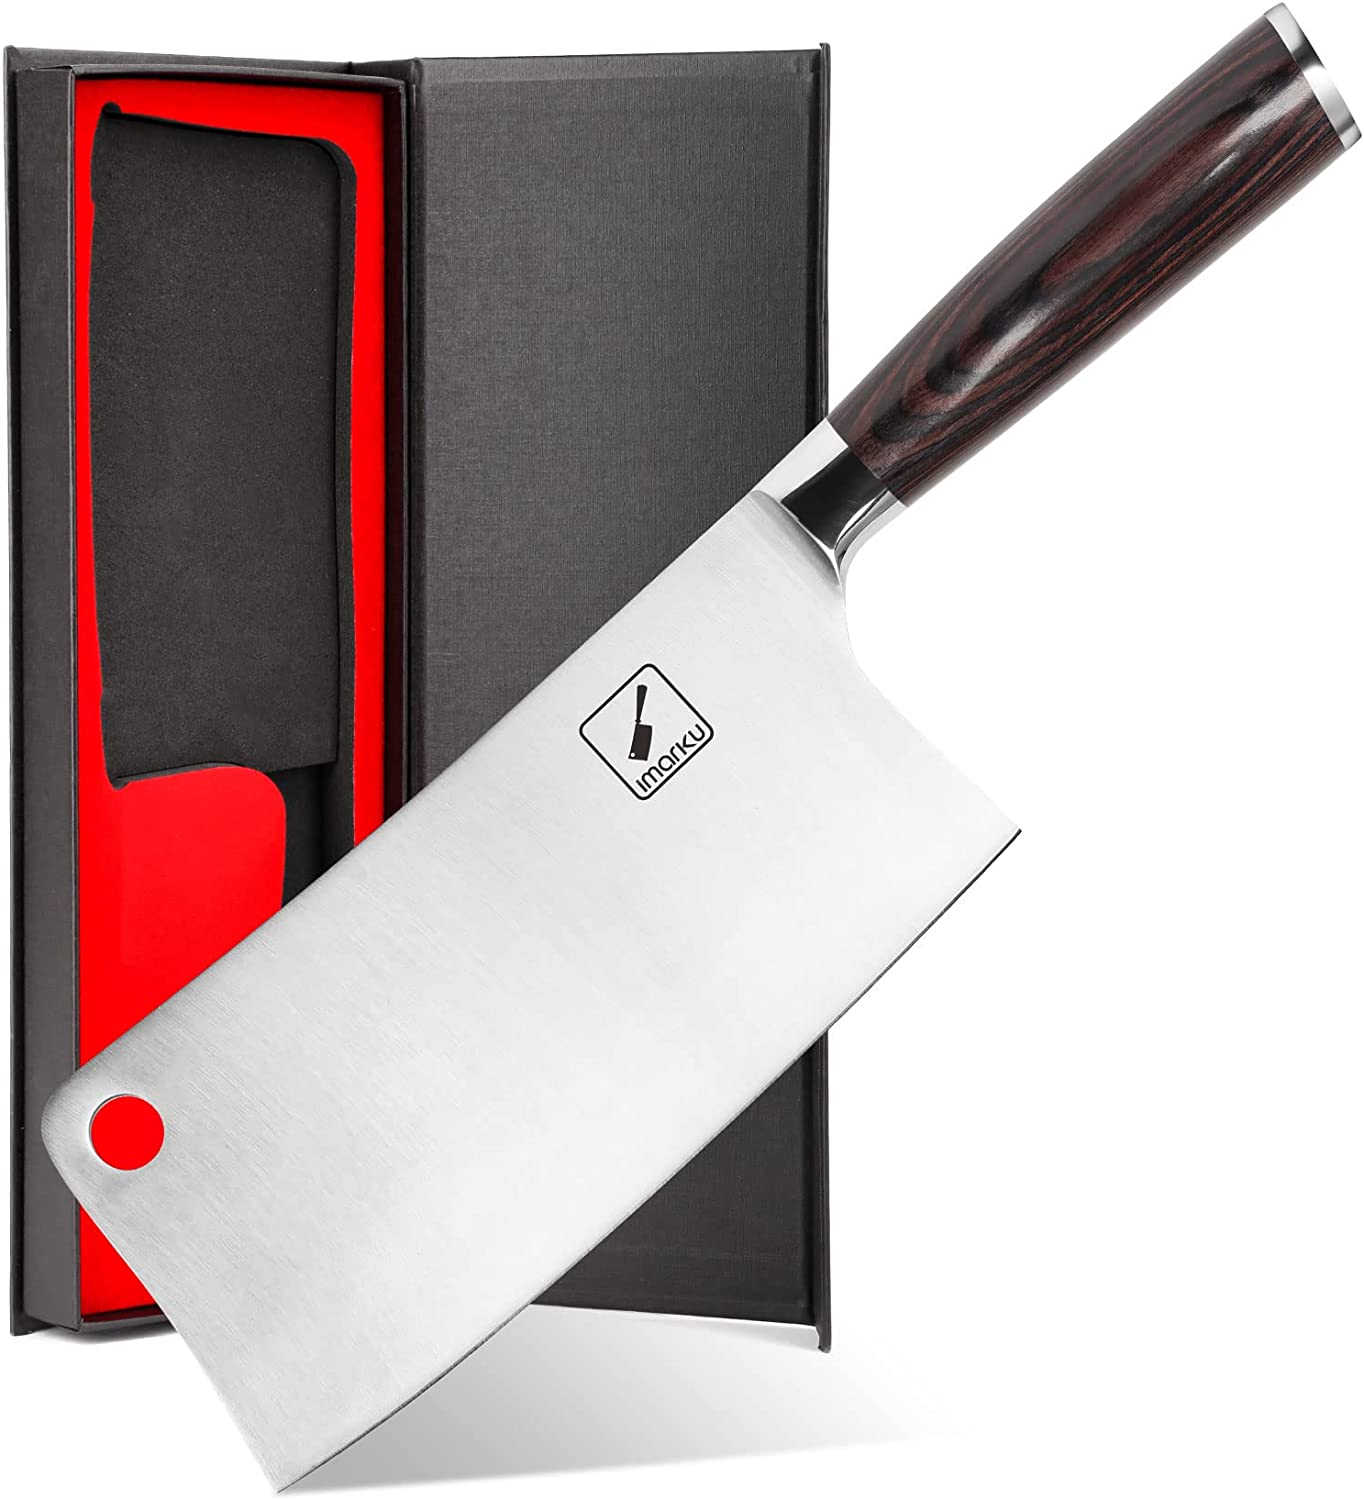 Cleaver Knife Different Type of Kitchen Knives